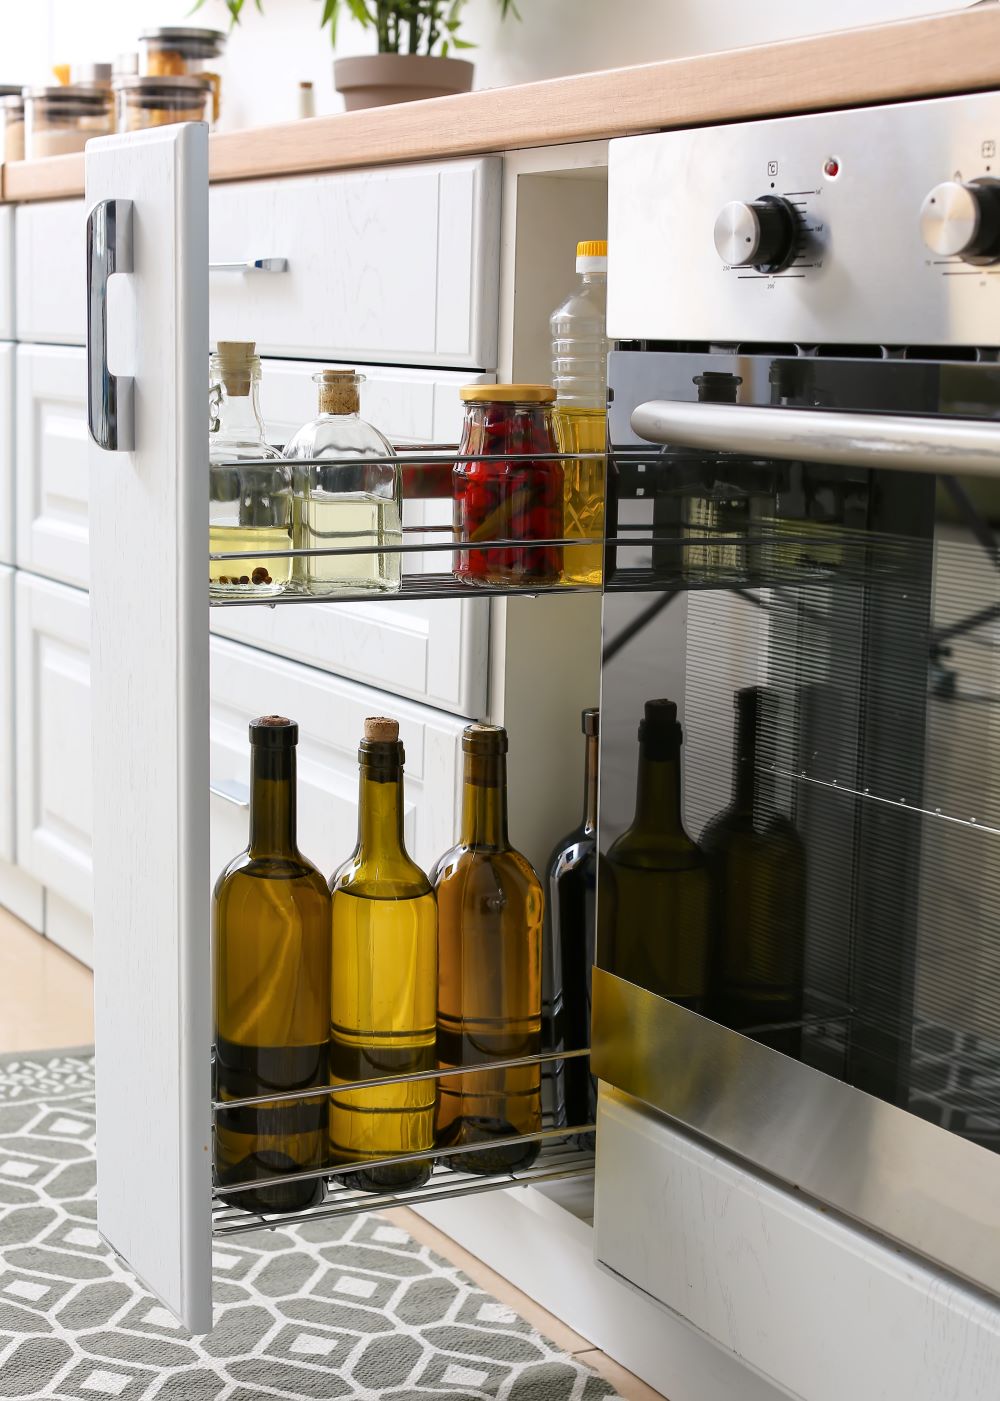 Vertical pull-out shelf with some bottles